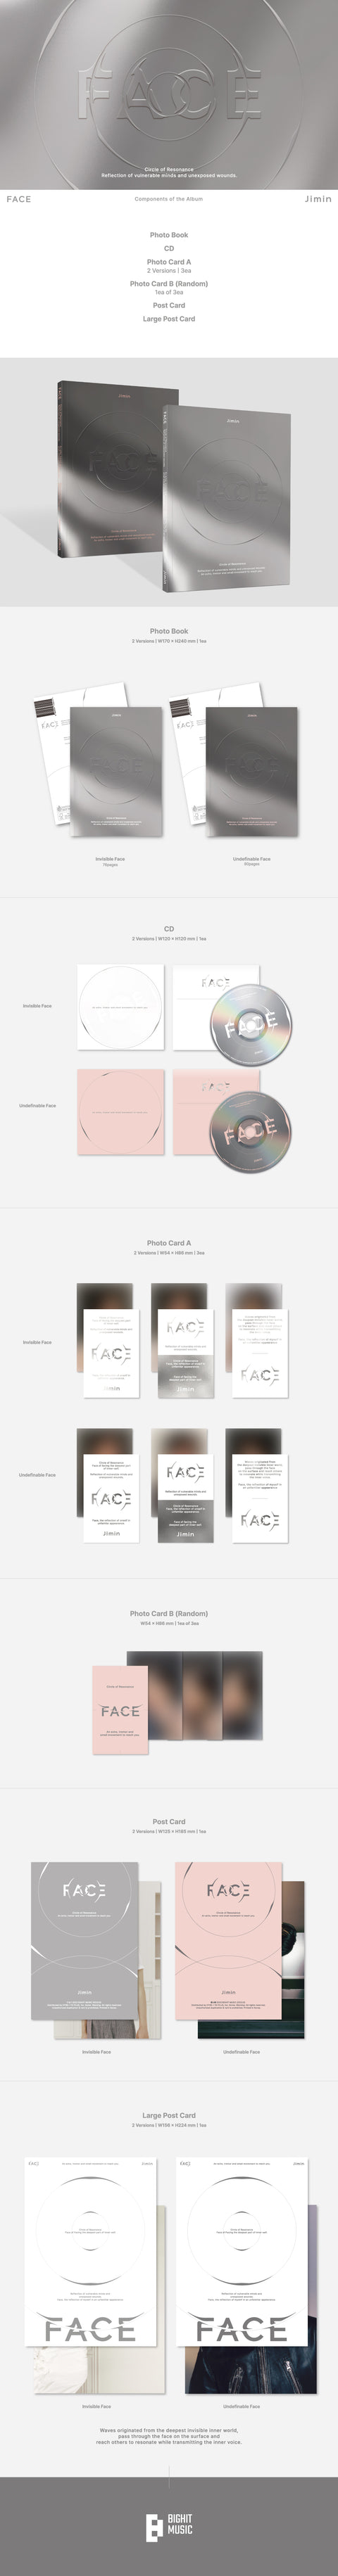 JIMIN  - FACE (INVISIBLE FACE VERSION CD) - UMG Africa